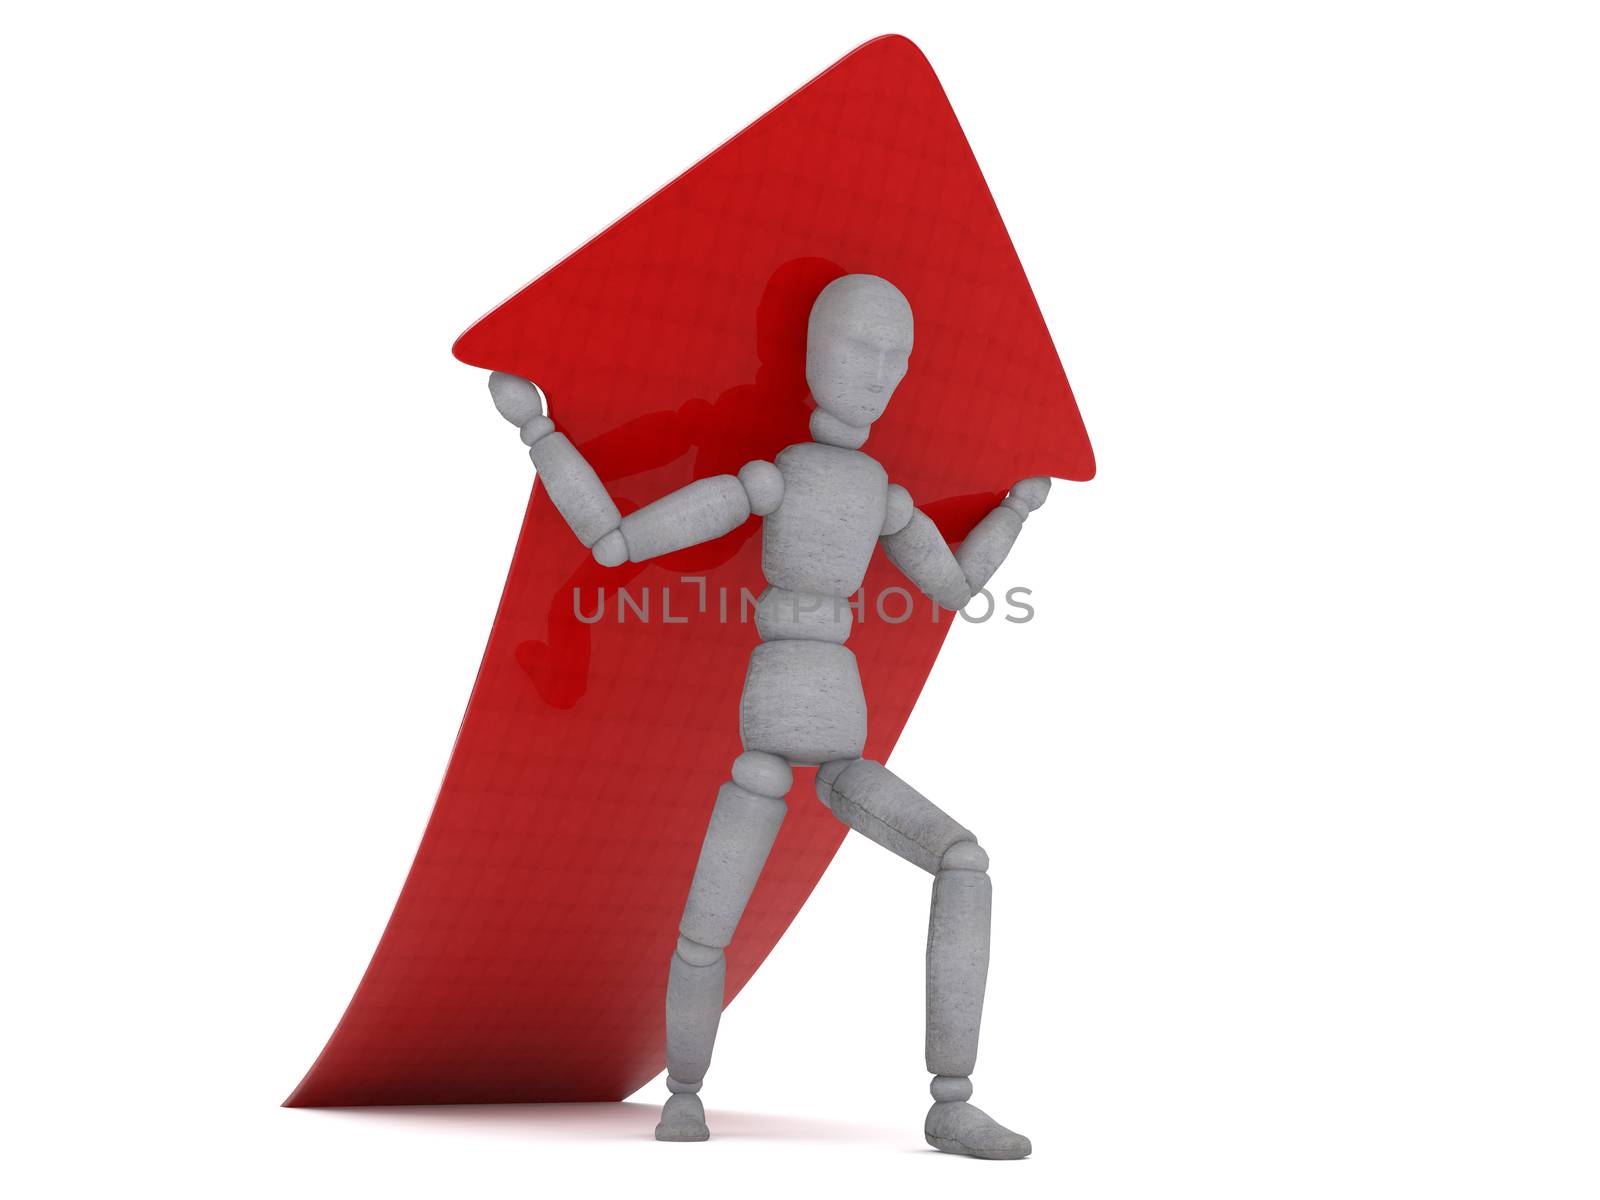 Character is holding on his shoulders a red glossy arrow that points up. The picture shows a craving for victory, labor, force growth and results.